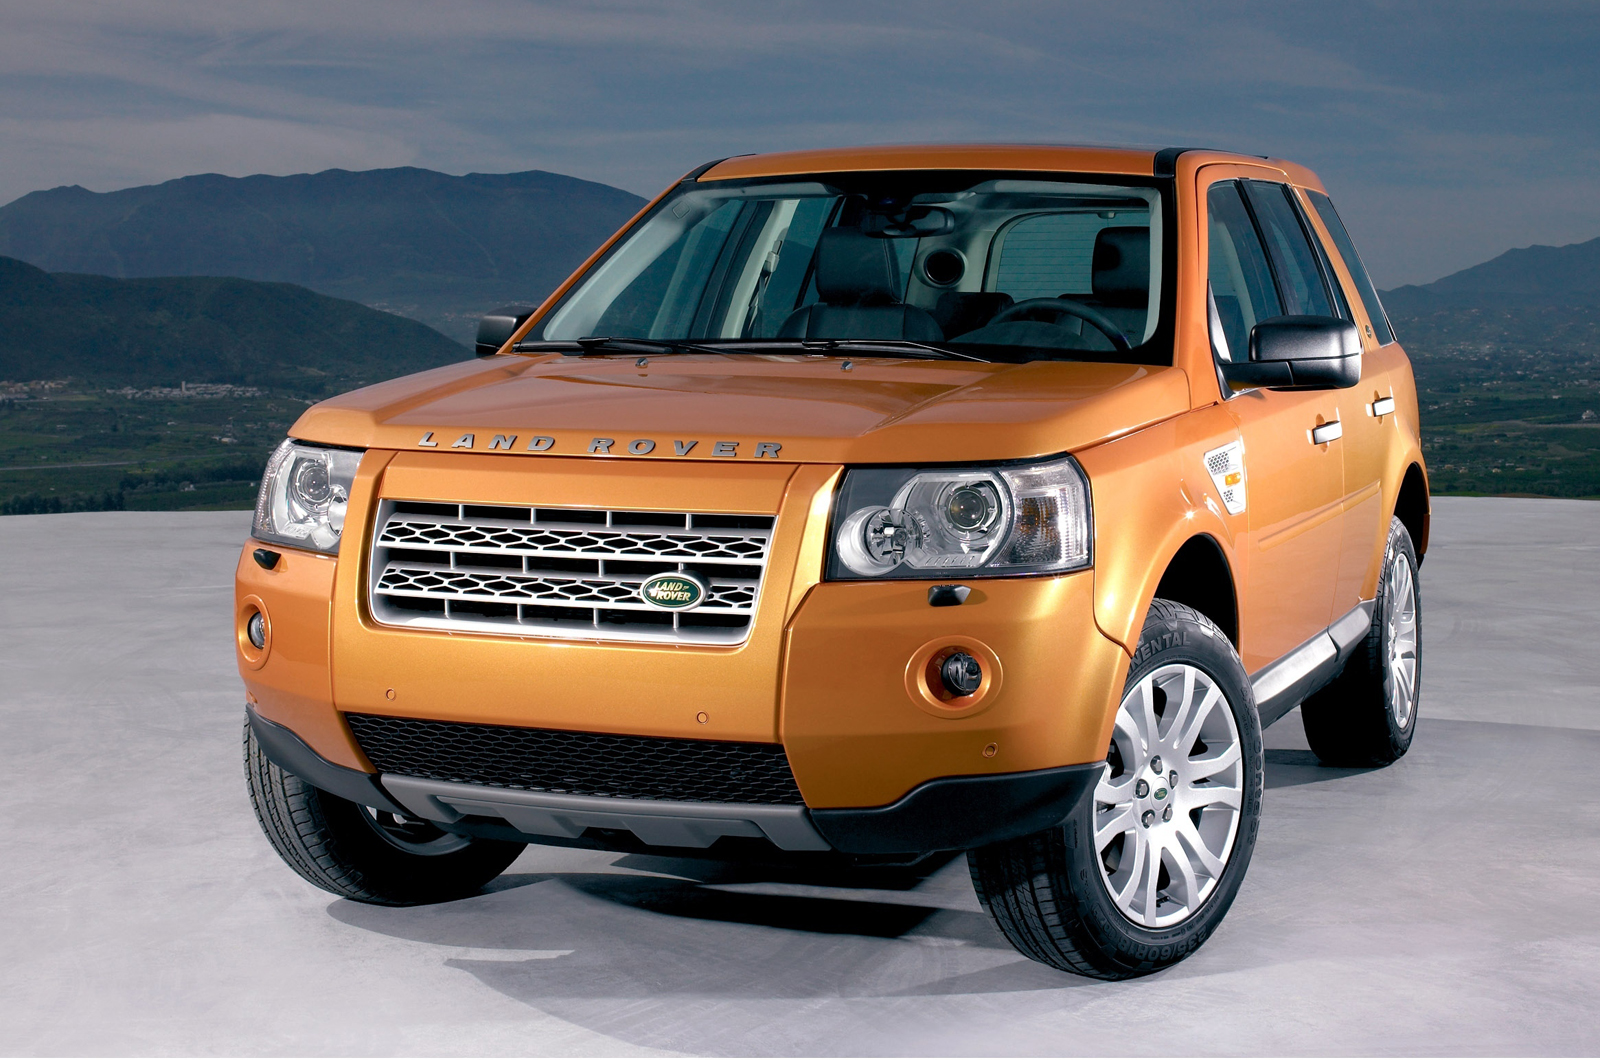 New Land Rover Freelander to join extended Discovery family